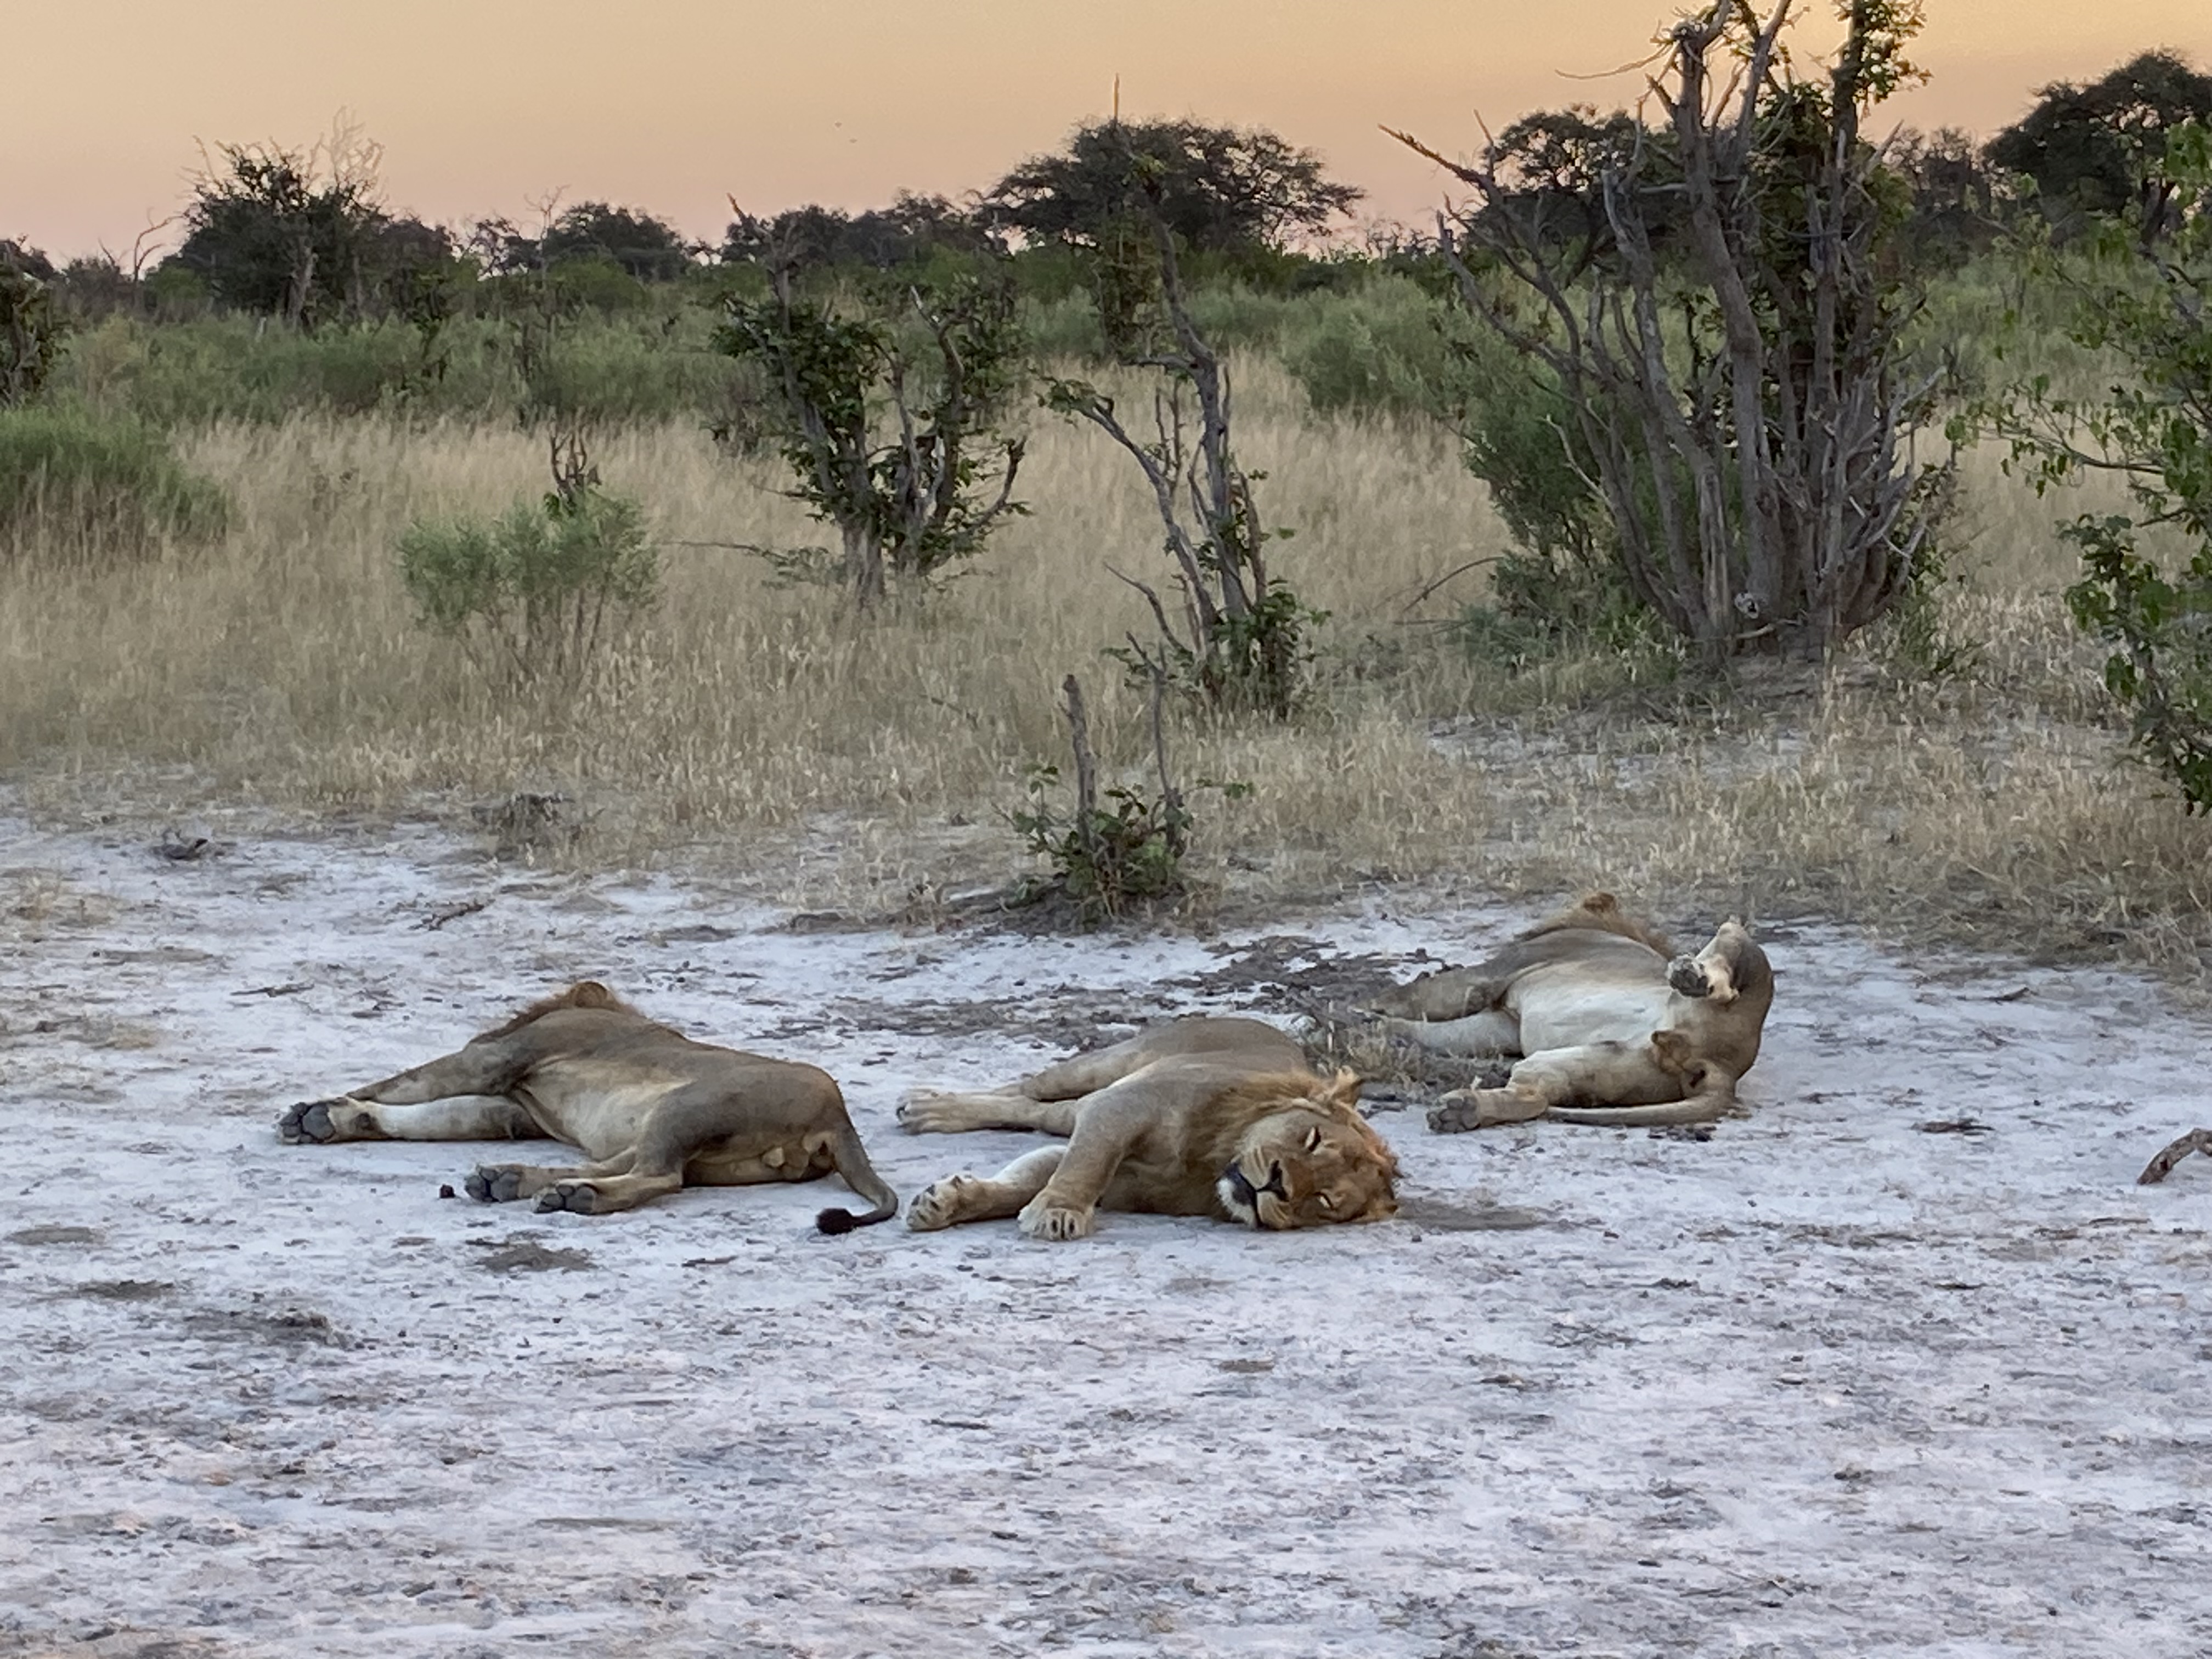 In Botswana, we had a sundowner with some sleepy lions on the last night of the trip!